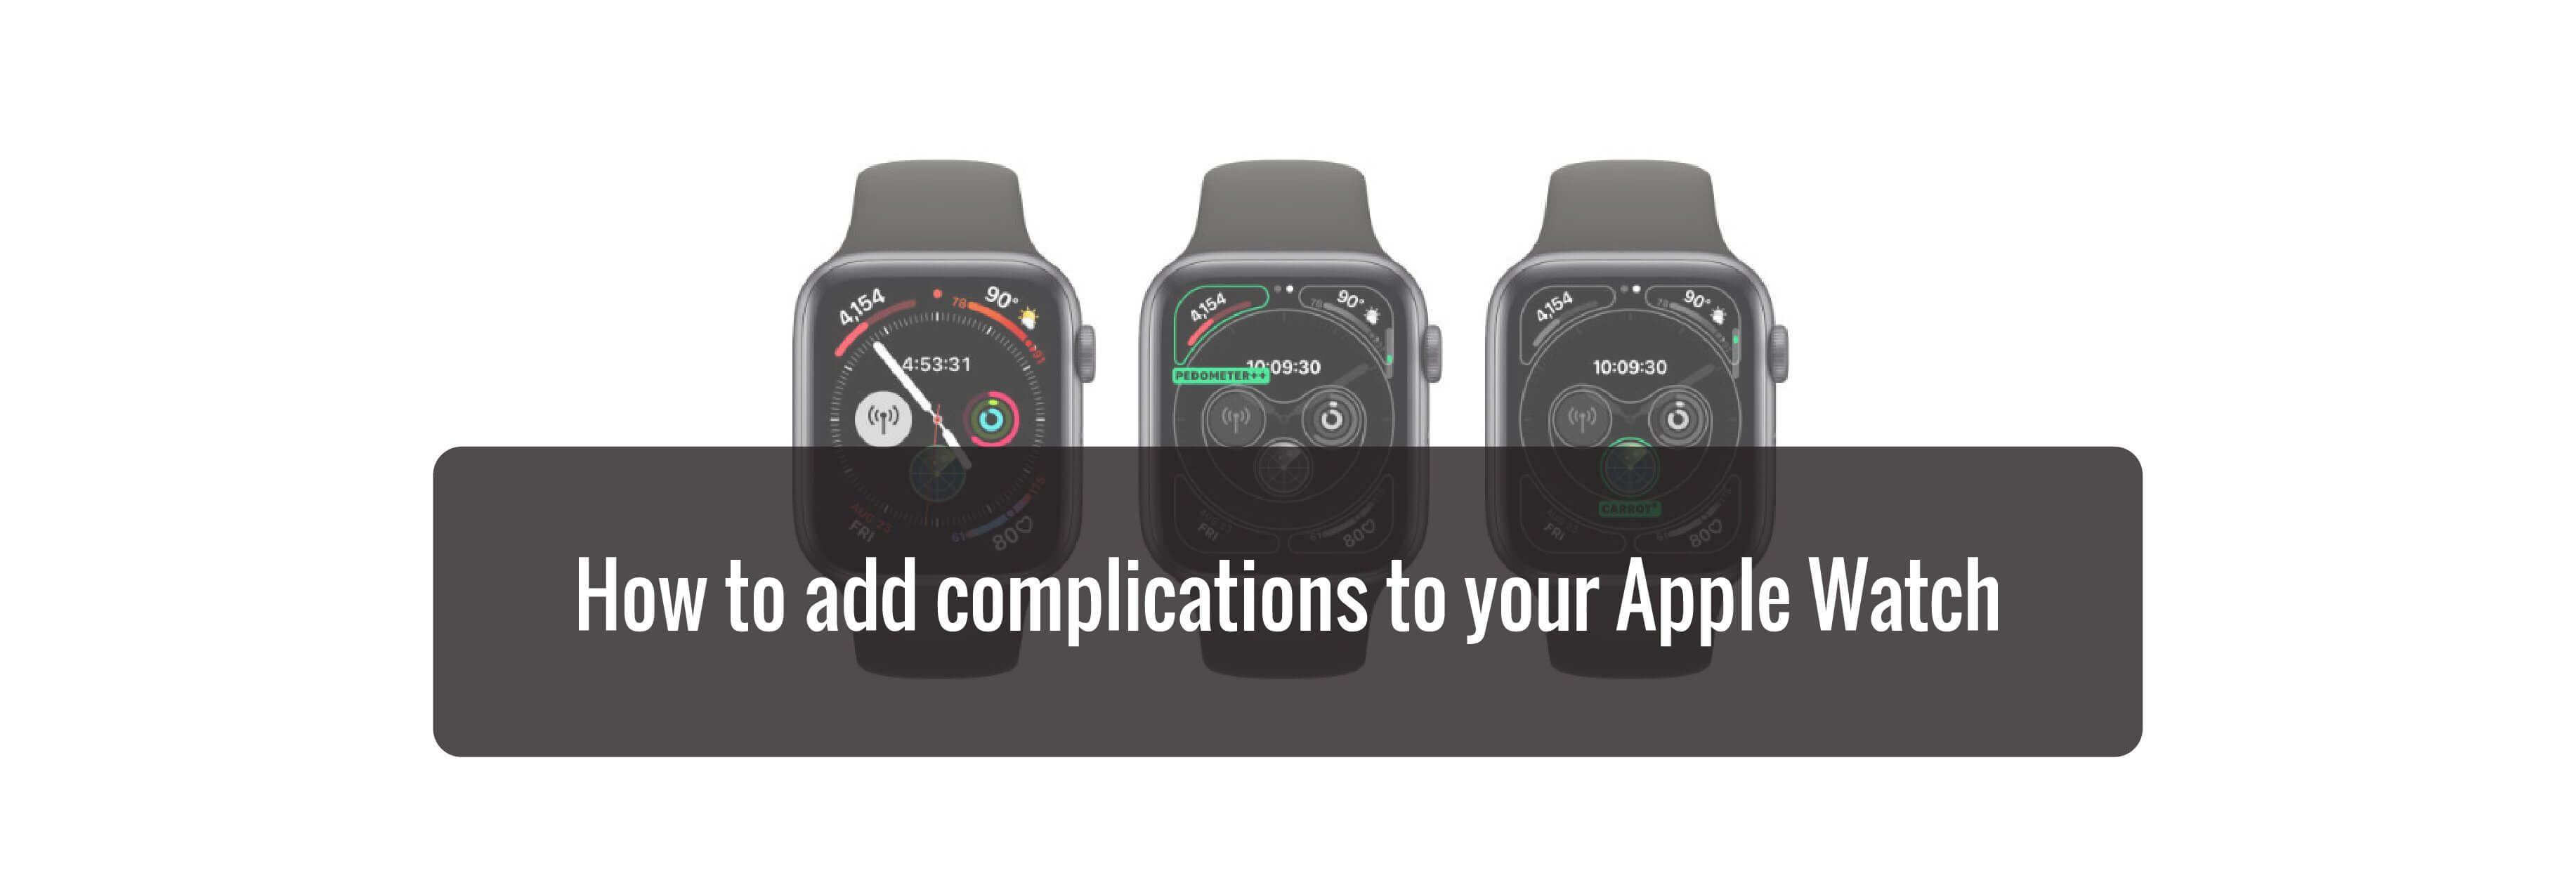 How to add complications to your Apple Watch